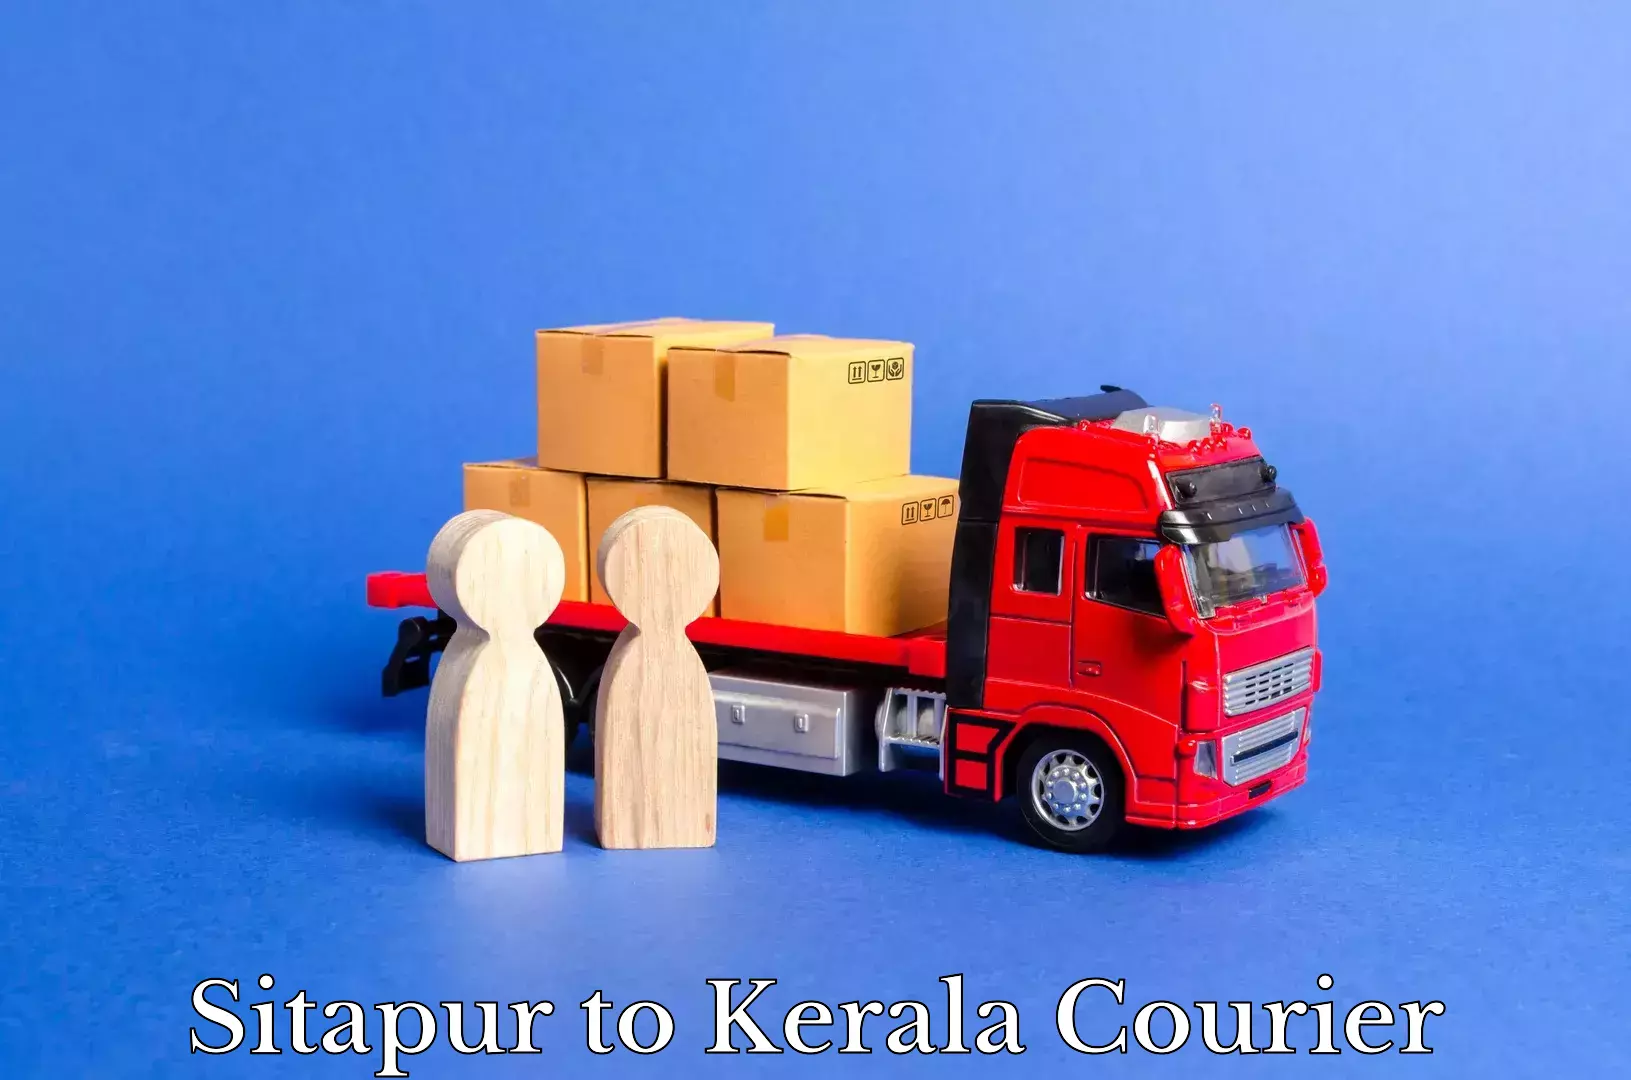 Subscription-based courier Sitapur to Kerala